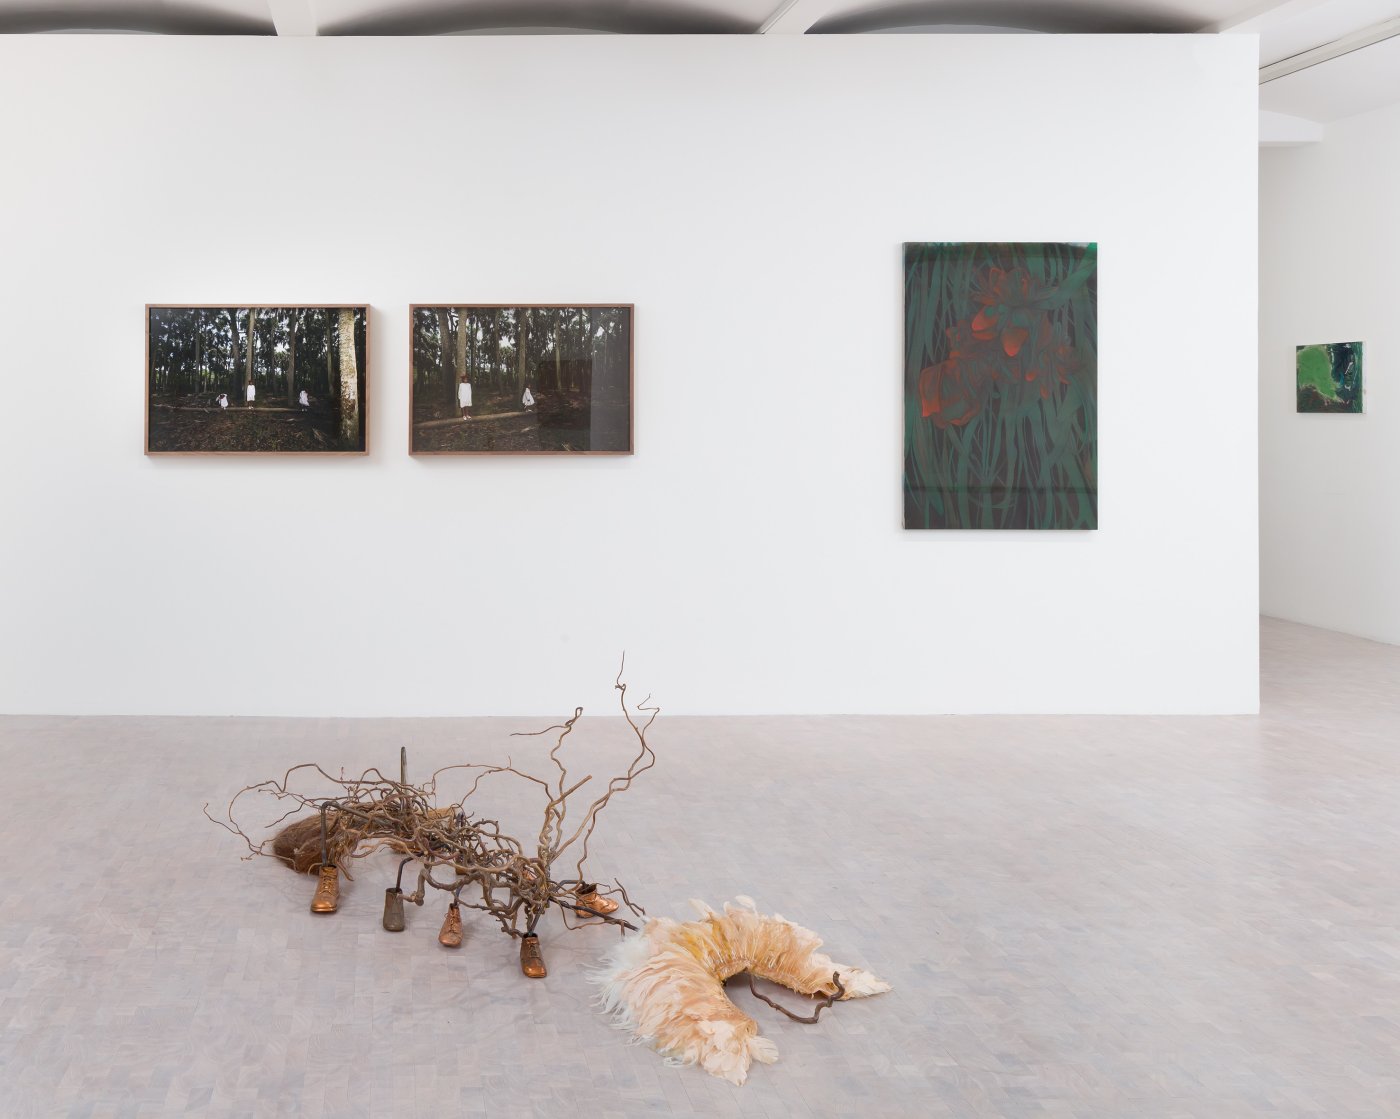 Installation image for Tales of Soil and Concrete, at Pippy Houldsworth Gallery